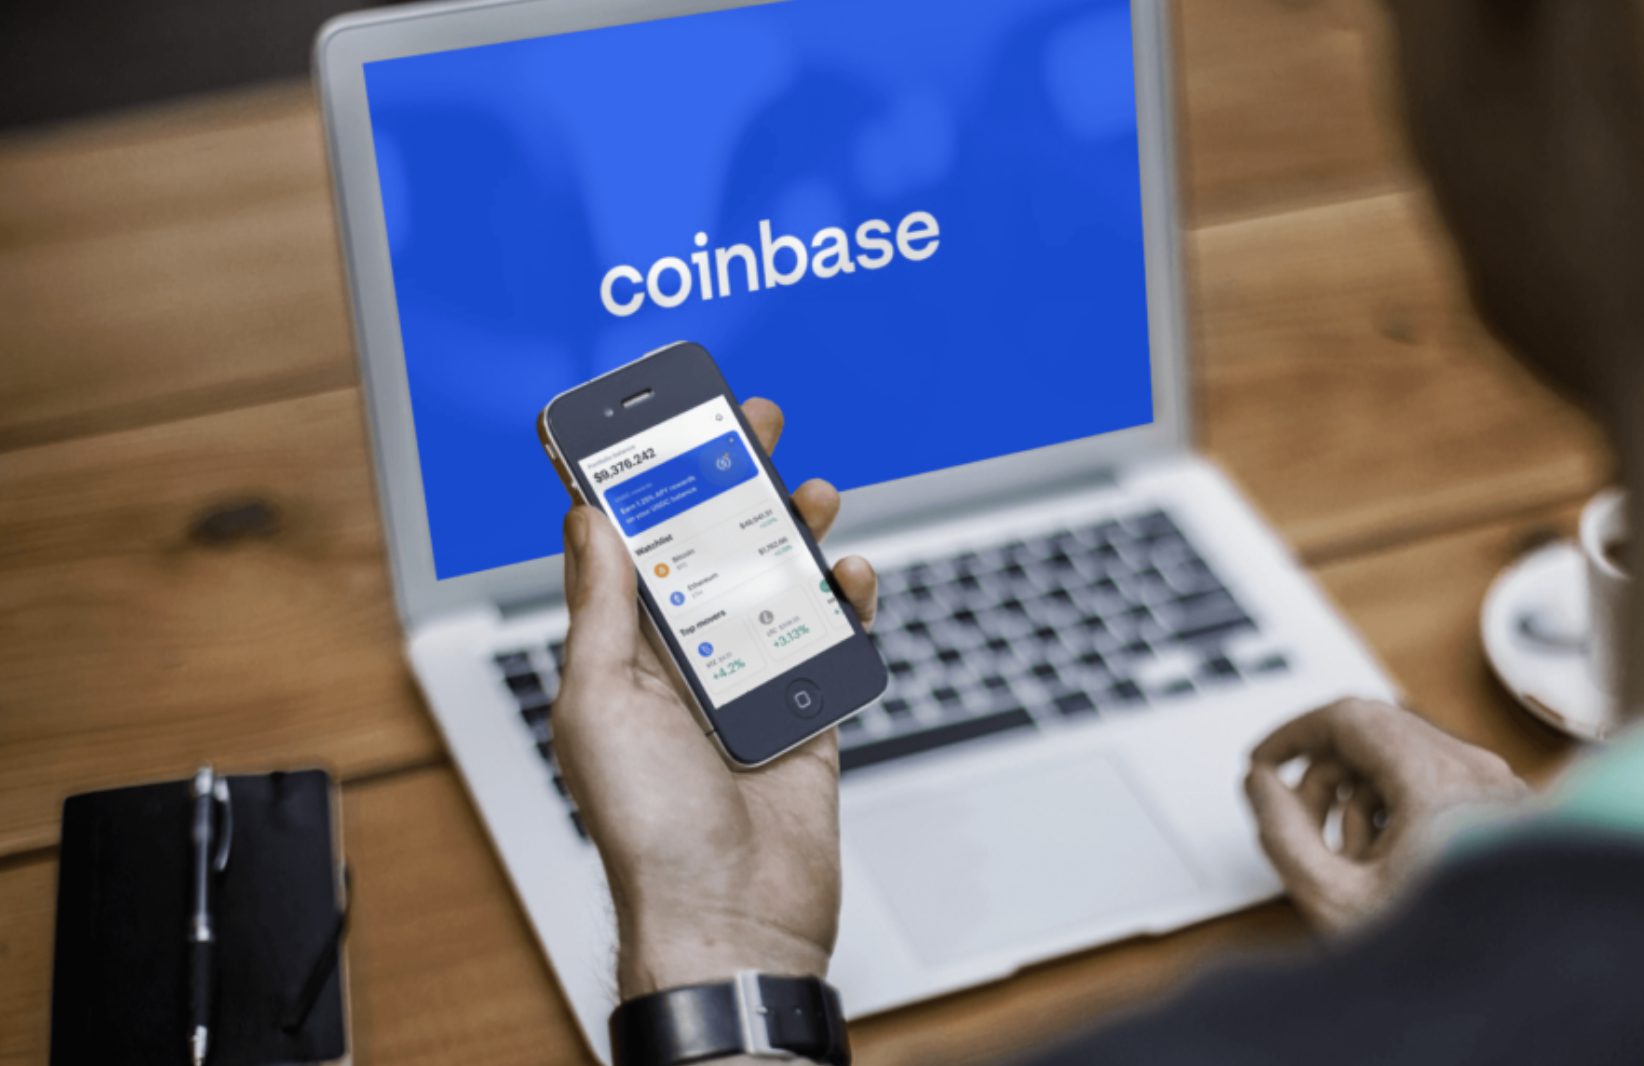 why does coinbase take so long to send